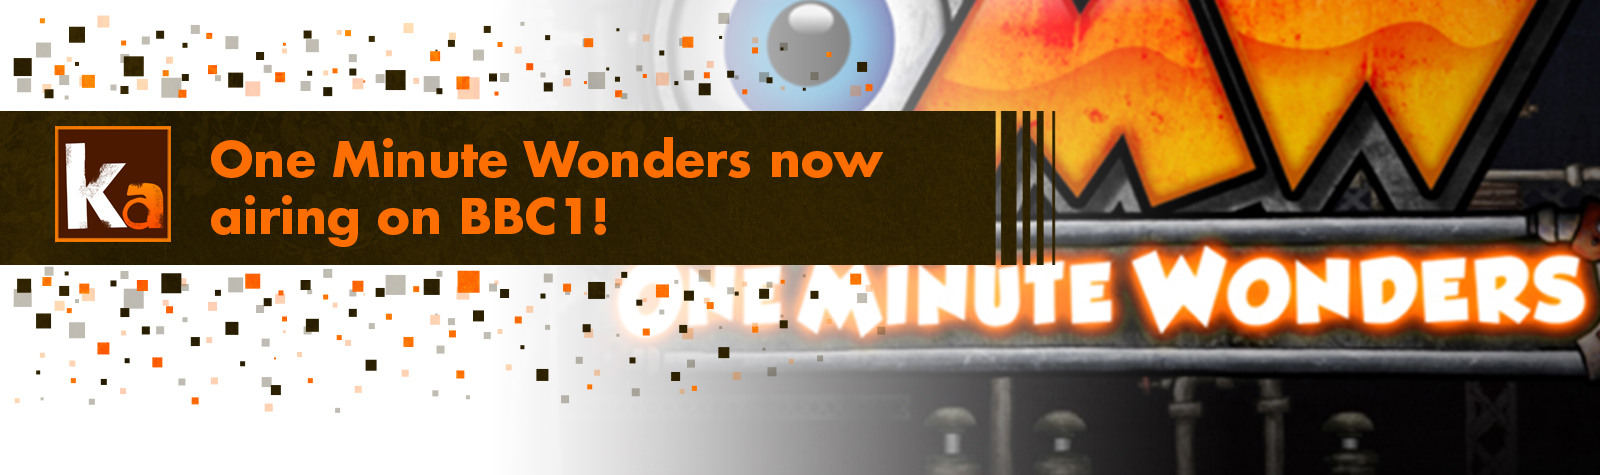 One Minute Wonders now airing on BBC1!